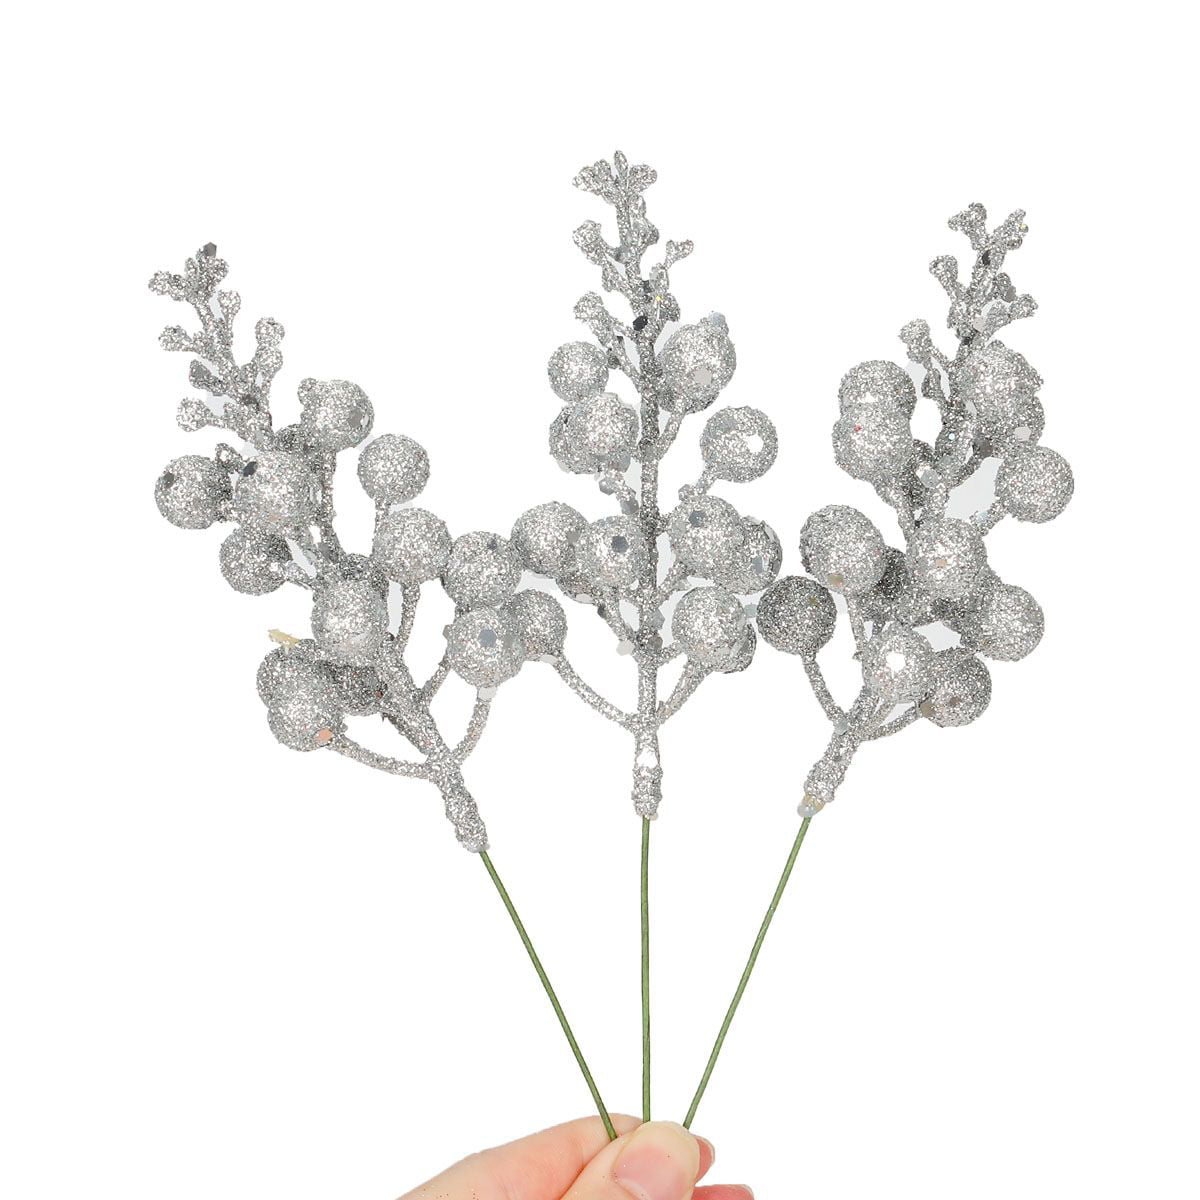  TEHAUX 5pcs 50 Crystal Picks for Christmas Tree Flower Branches  Christmas Wreath Pick Diamonds for Flower Bouquets Faux Garland 50 Stems  Acrylic Drops Mother White Filling The Flowers : Arts, Crafts